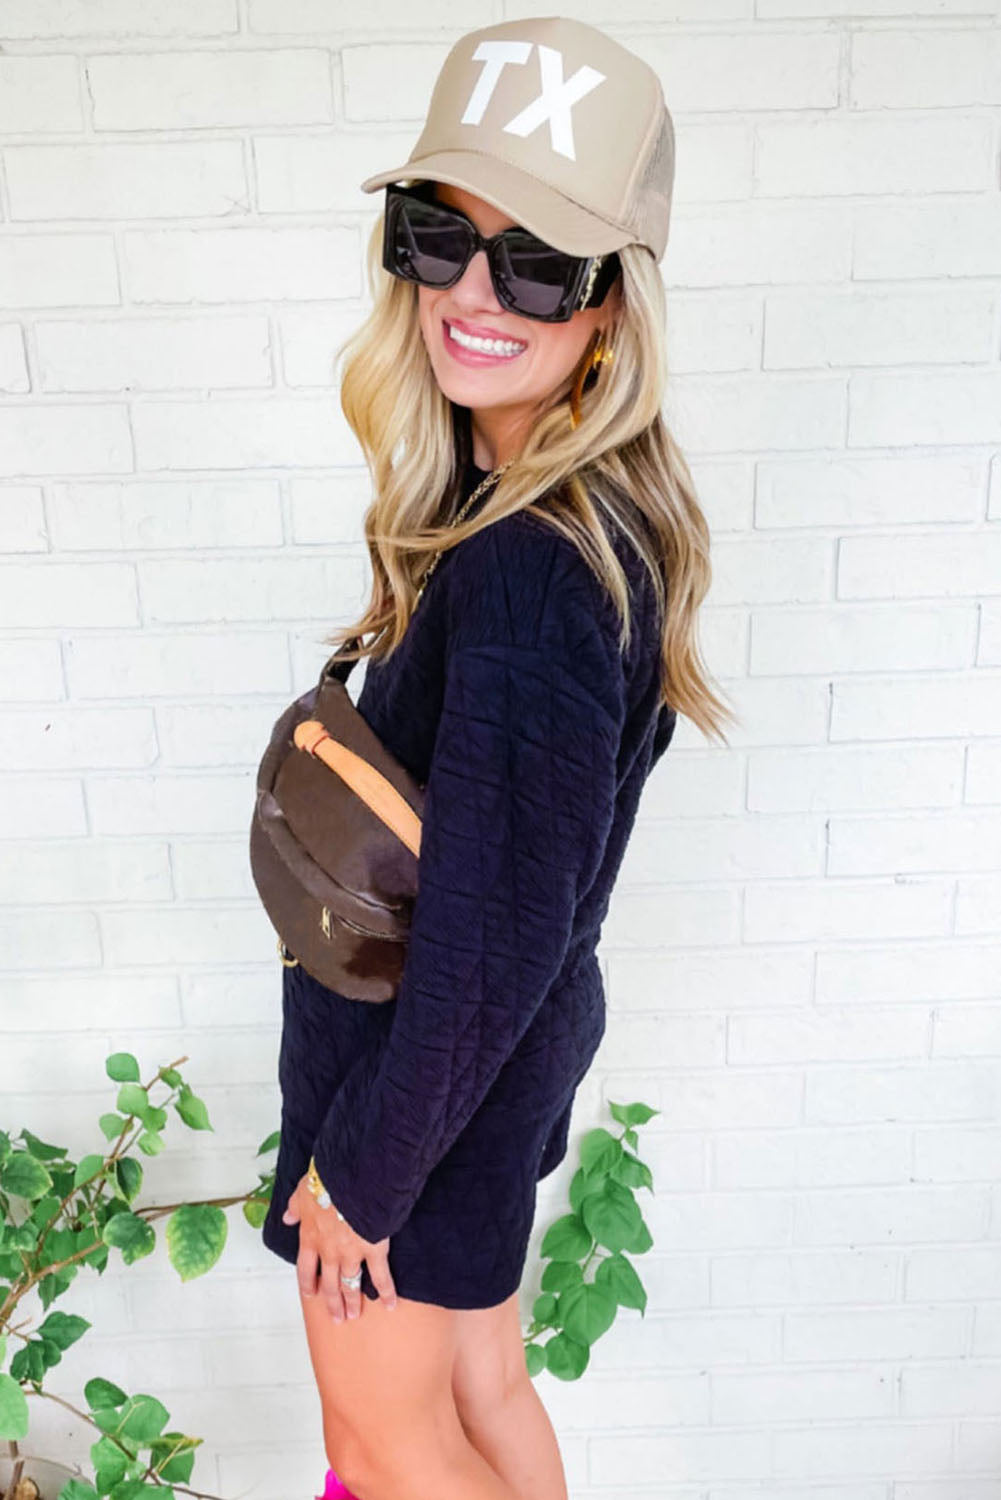 Black Textured Long Sleeve Top Shorts Outfit Set